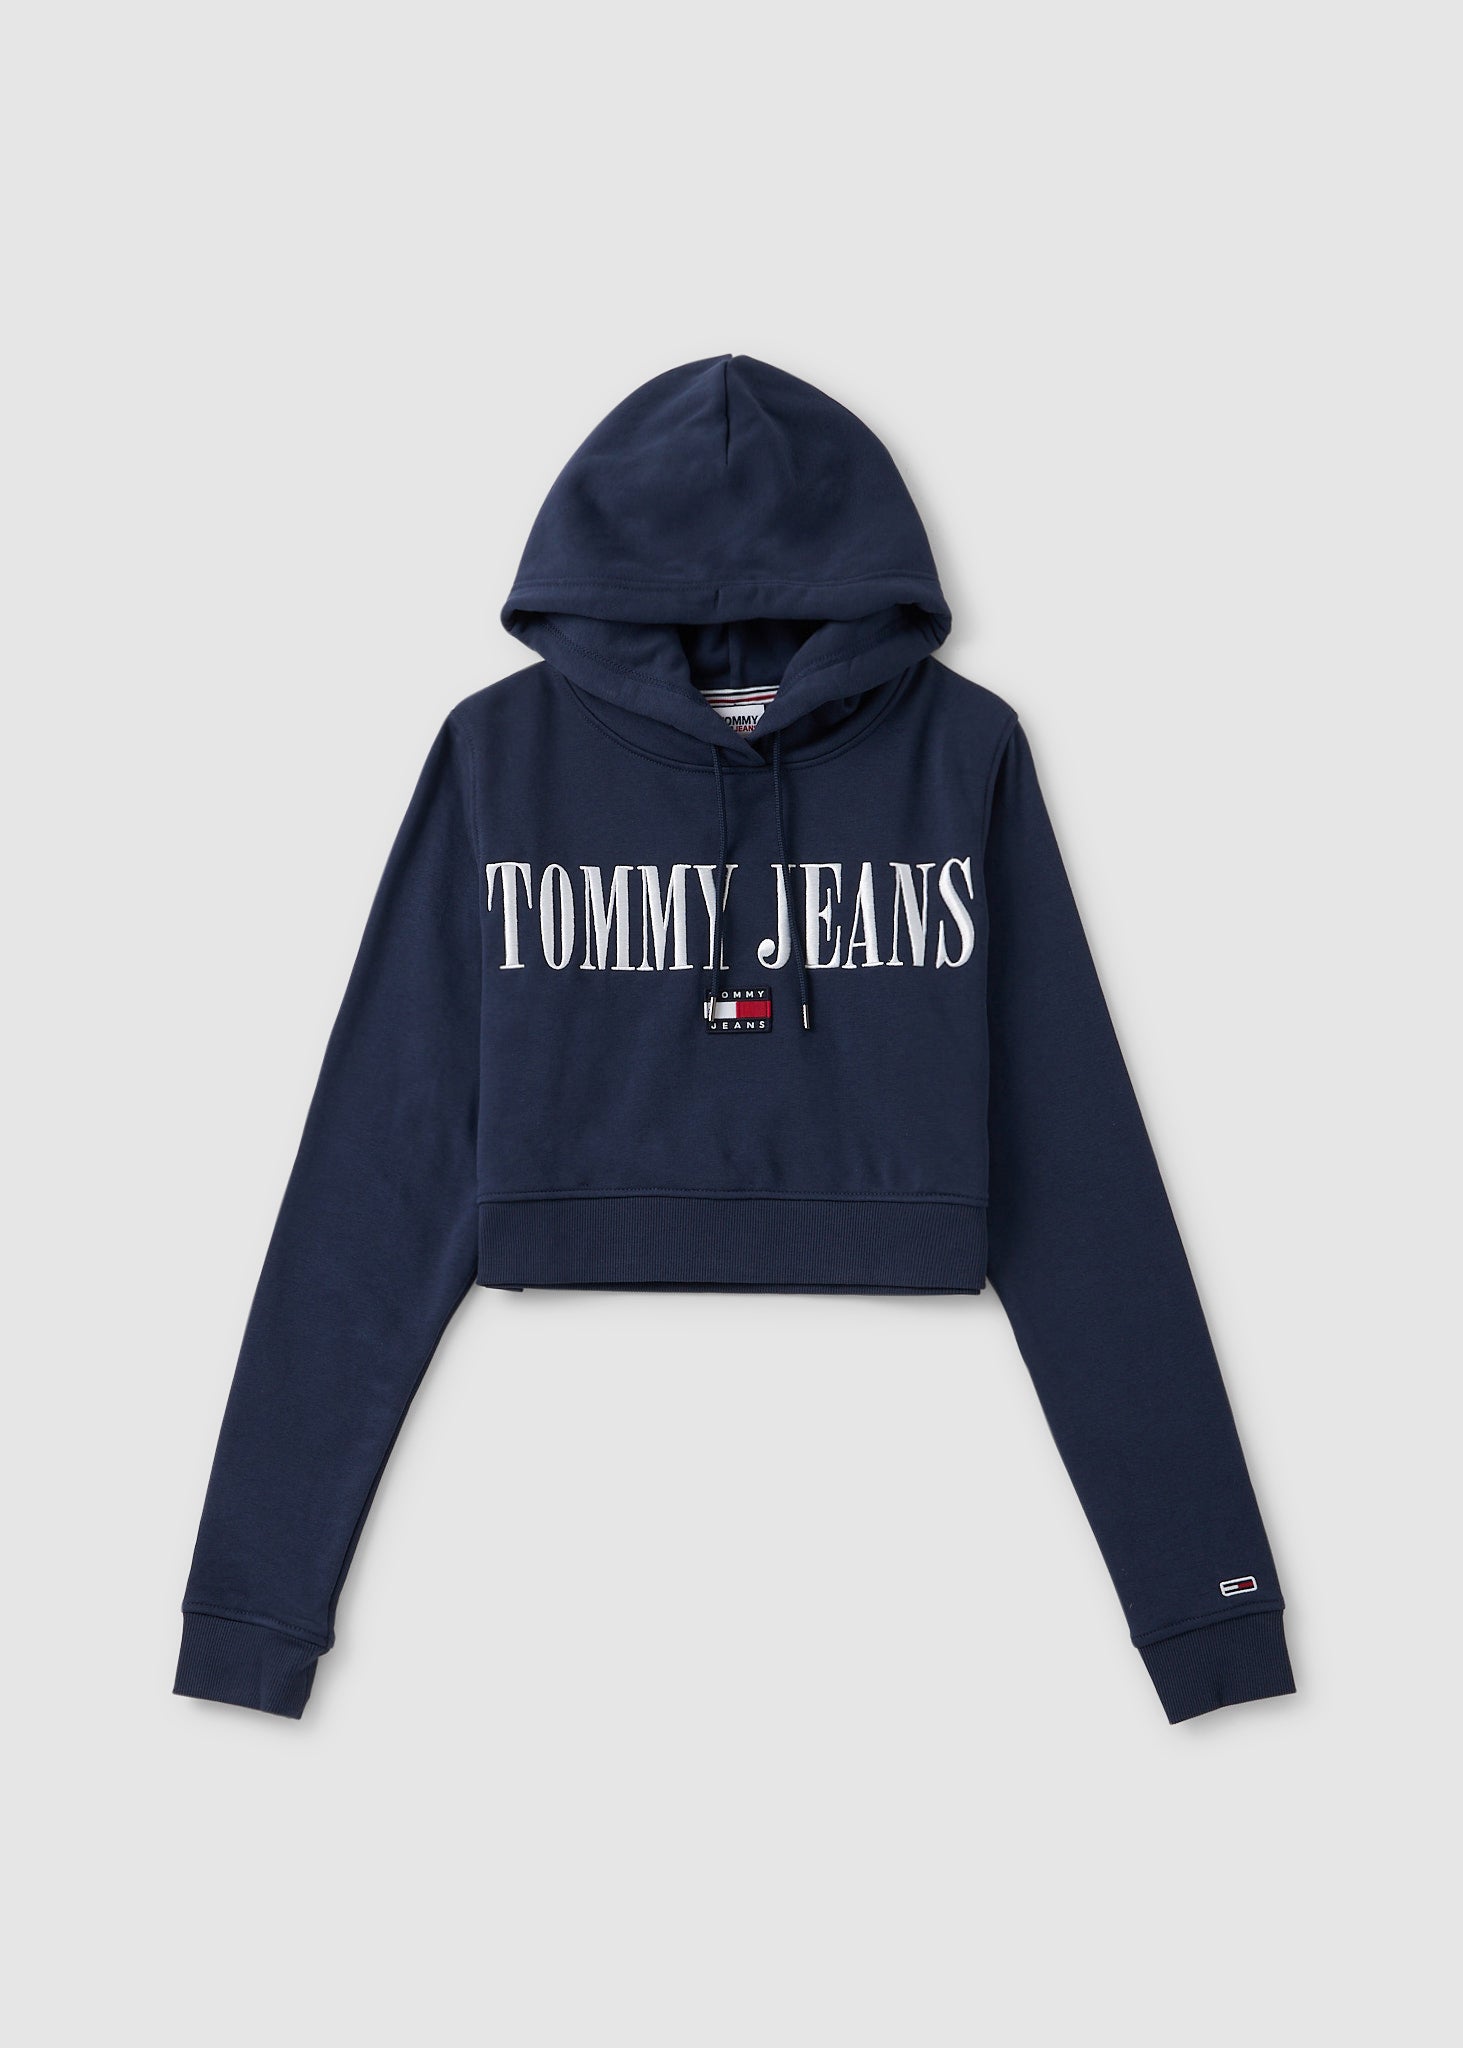 Image of Tommy Hilfiger Womens Crop Archive 2 Hoodie In Twilight Navy